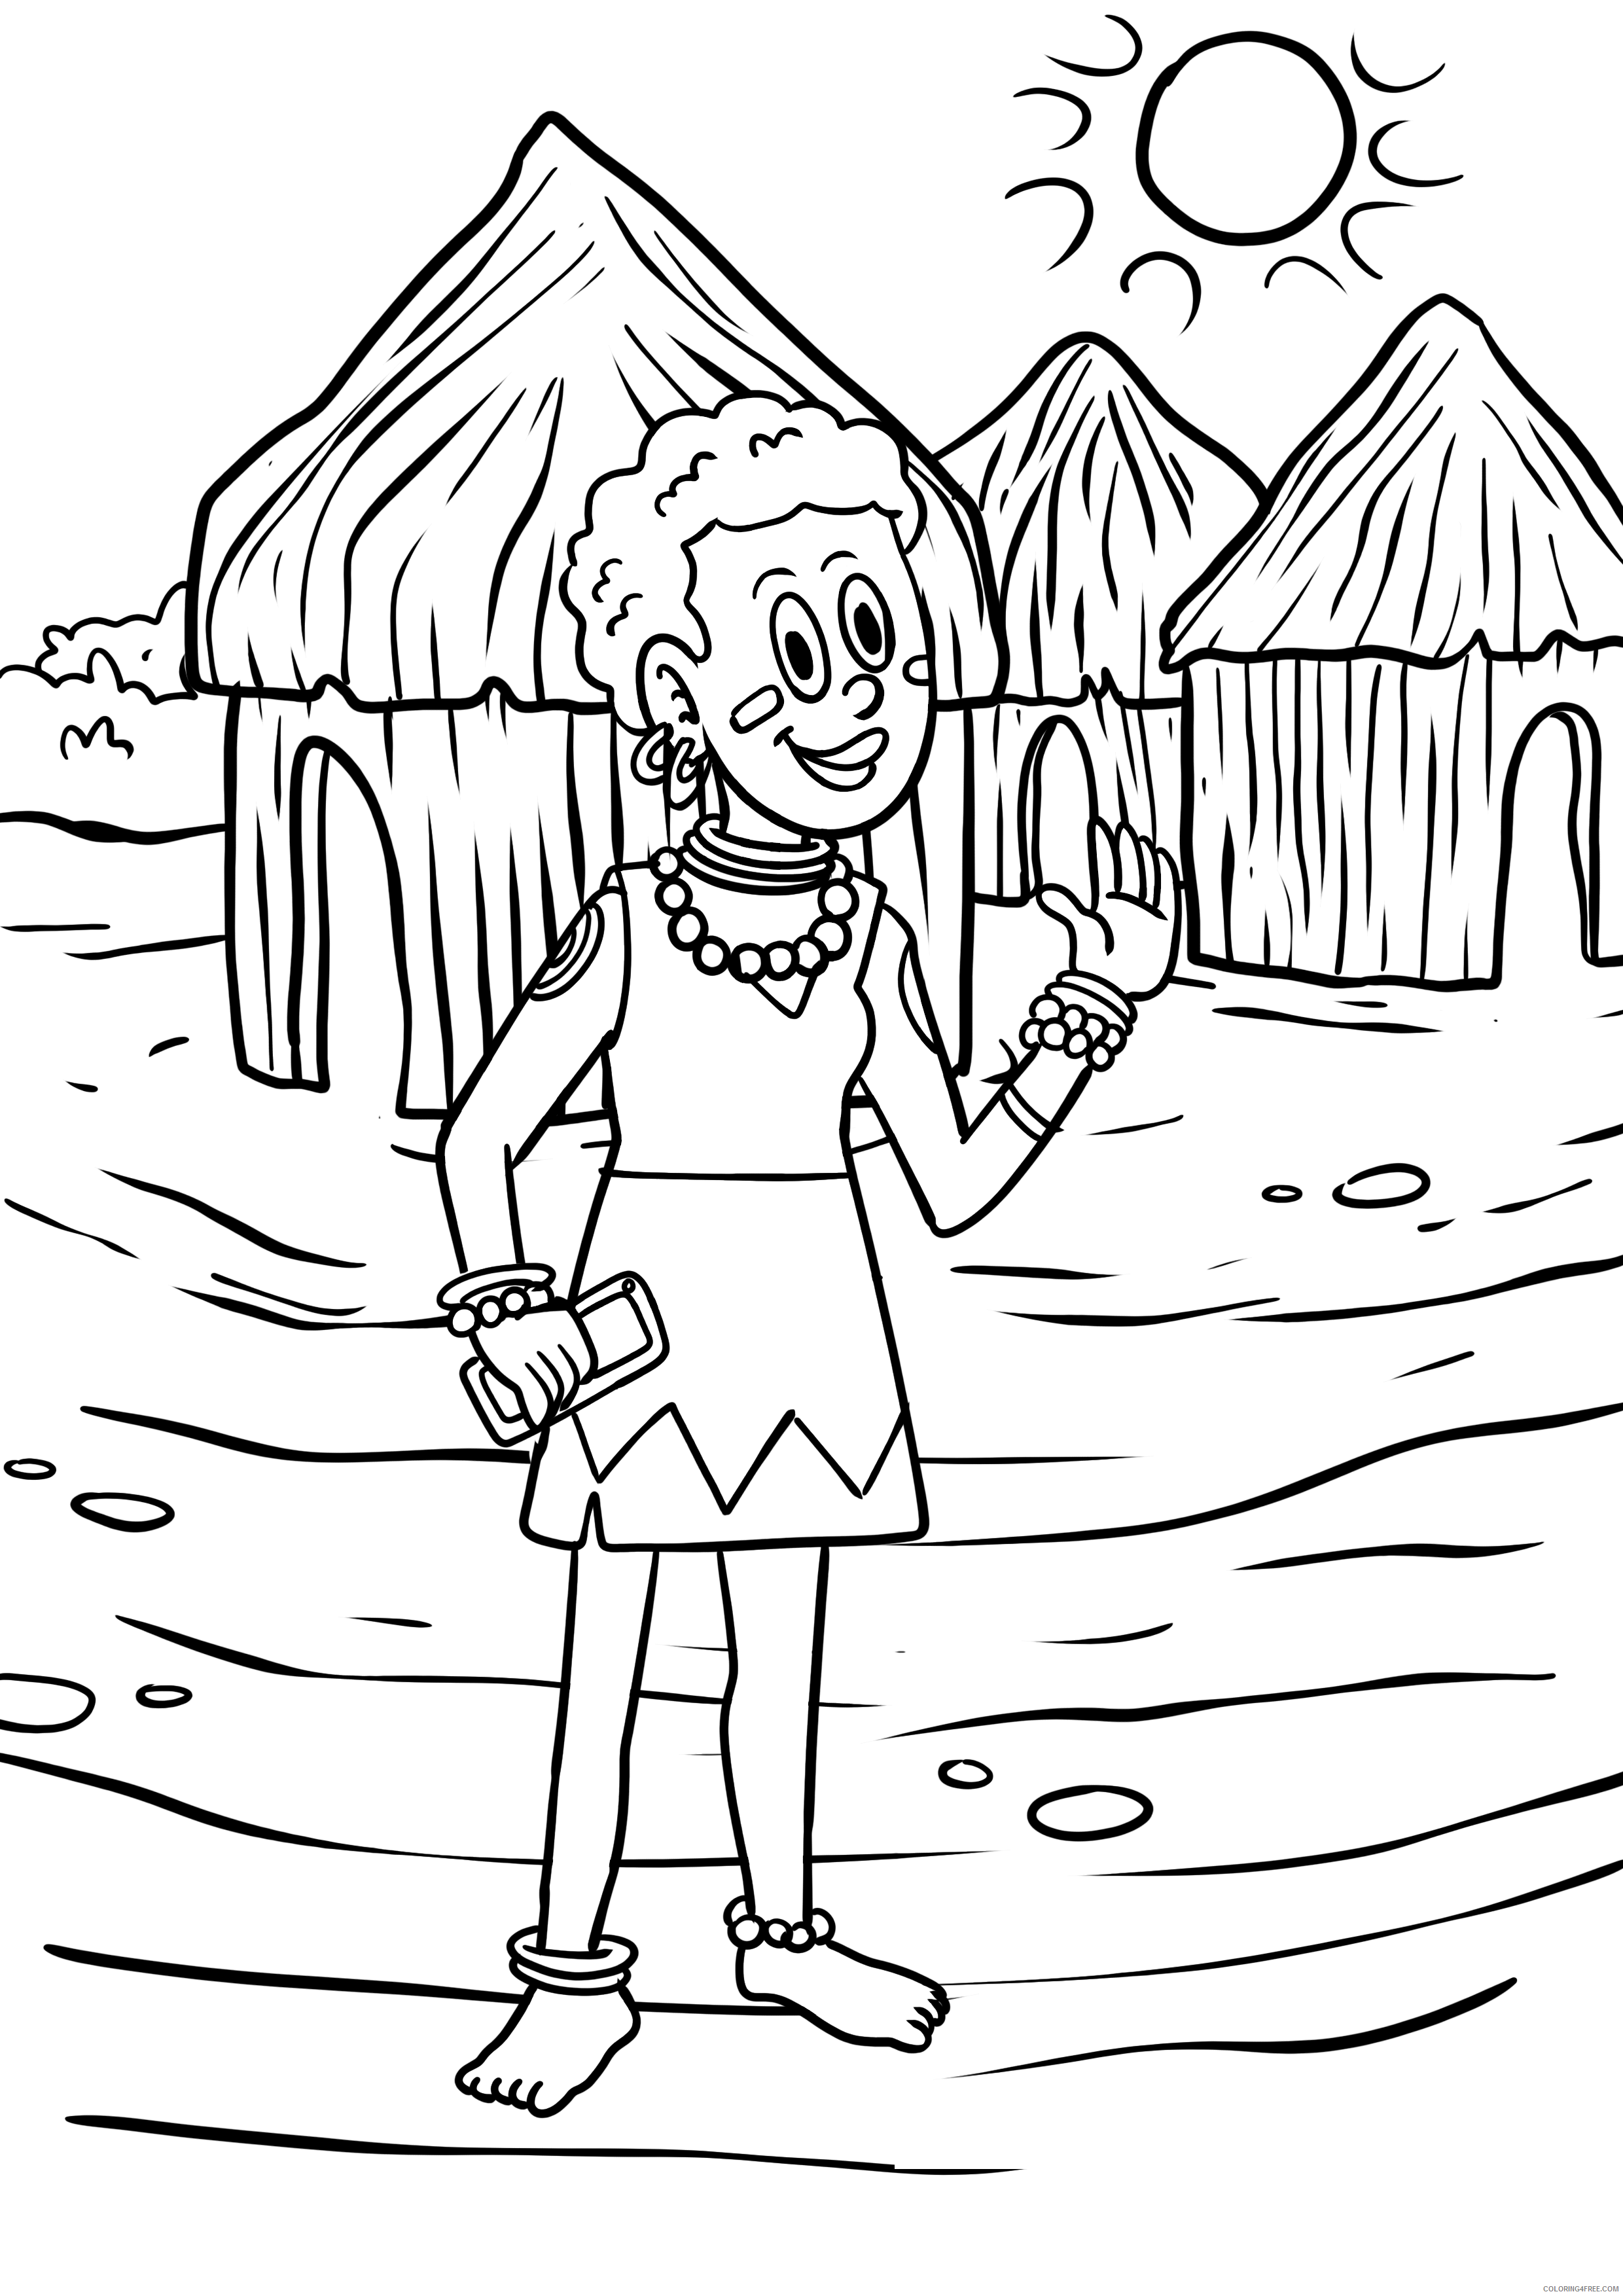 African Hut Coloring Pages Printable Sheets Malvorlage Kind in Afrika Personen 2021 a 2809 Coloring4free